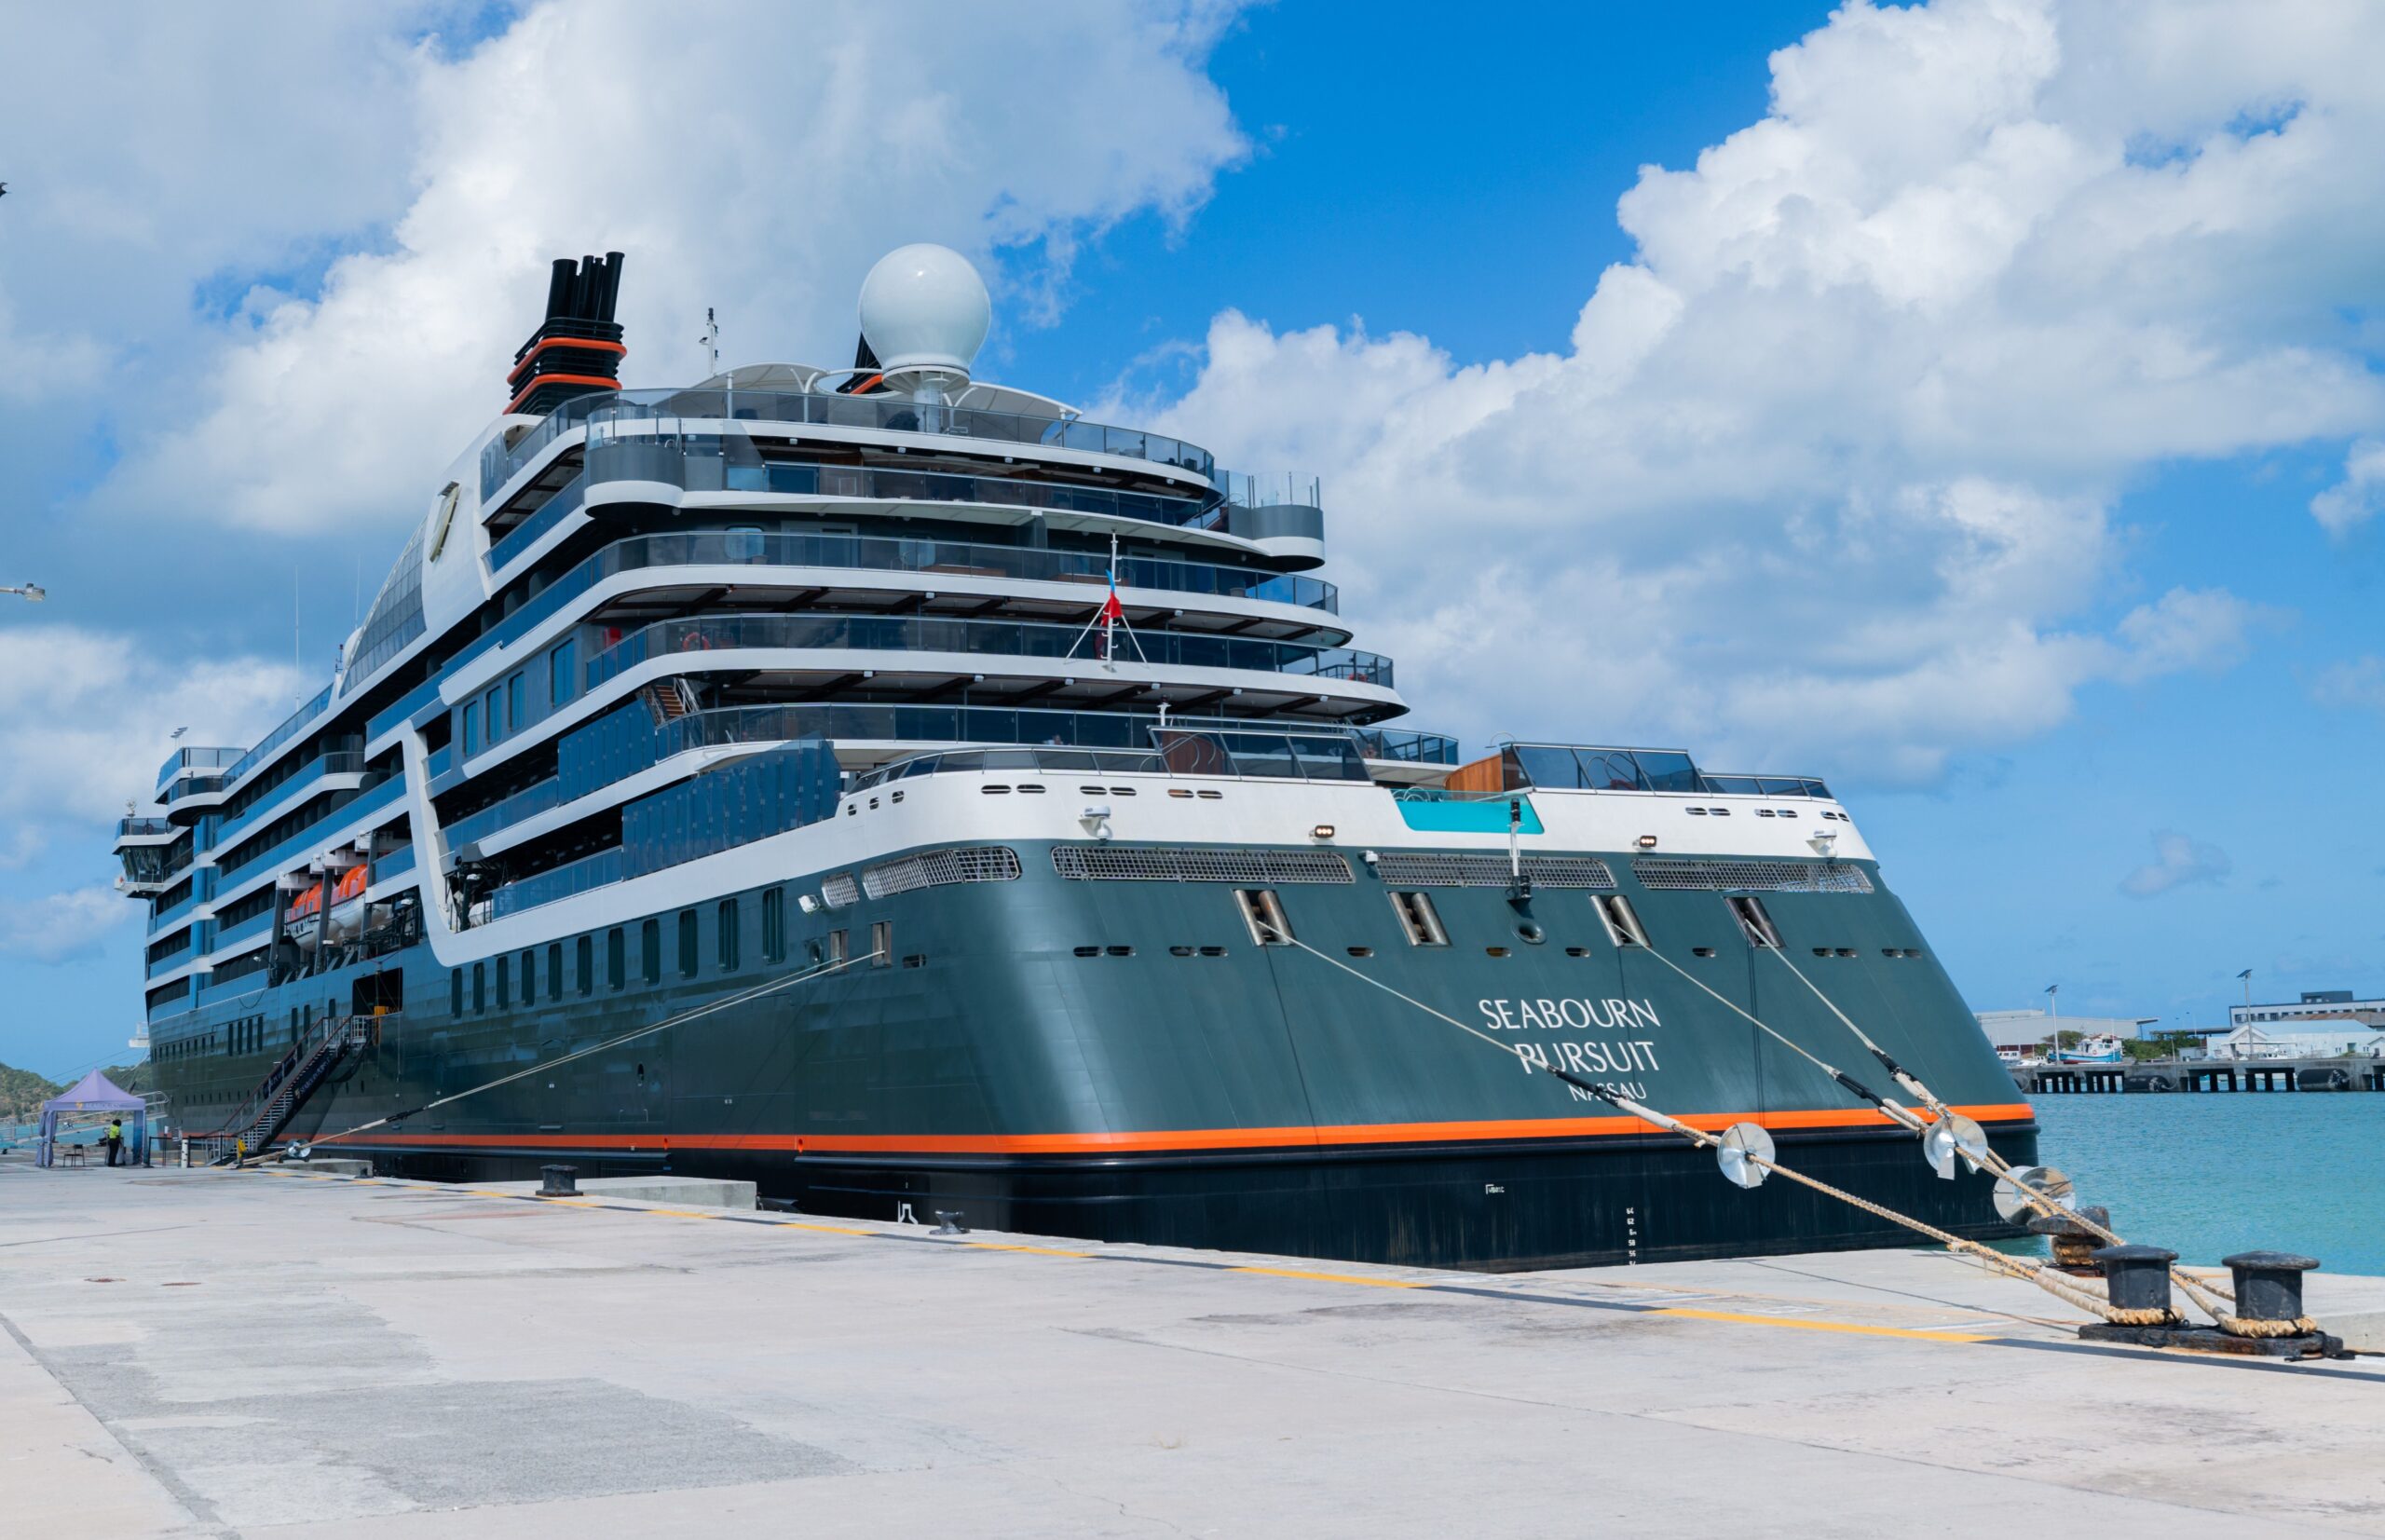 Antigua Cruise Port set for best cruise season since the pandemic